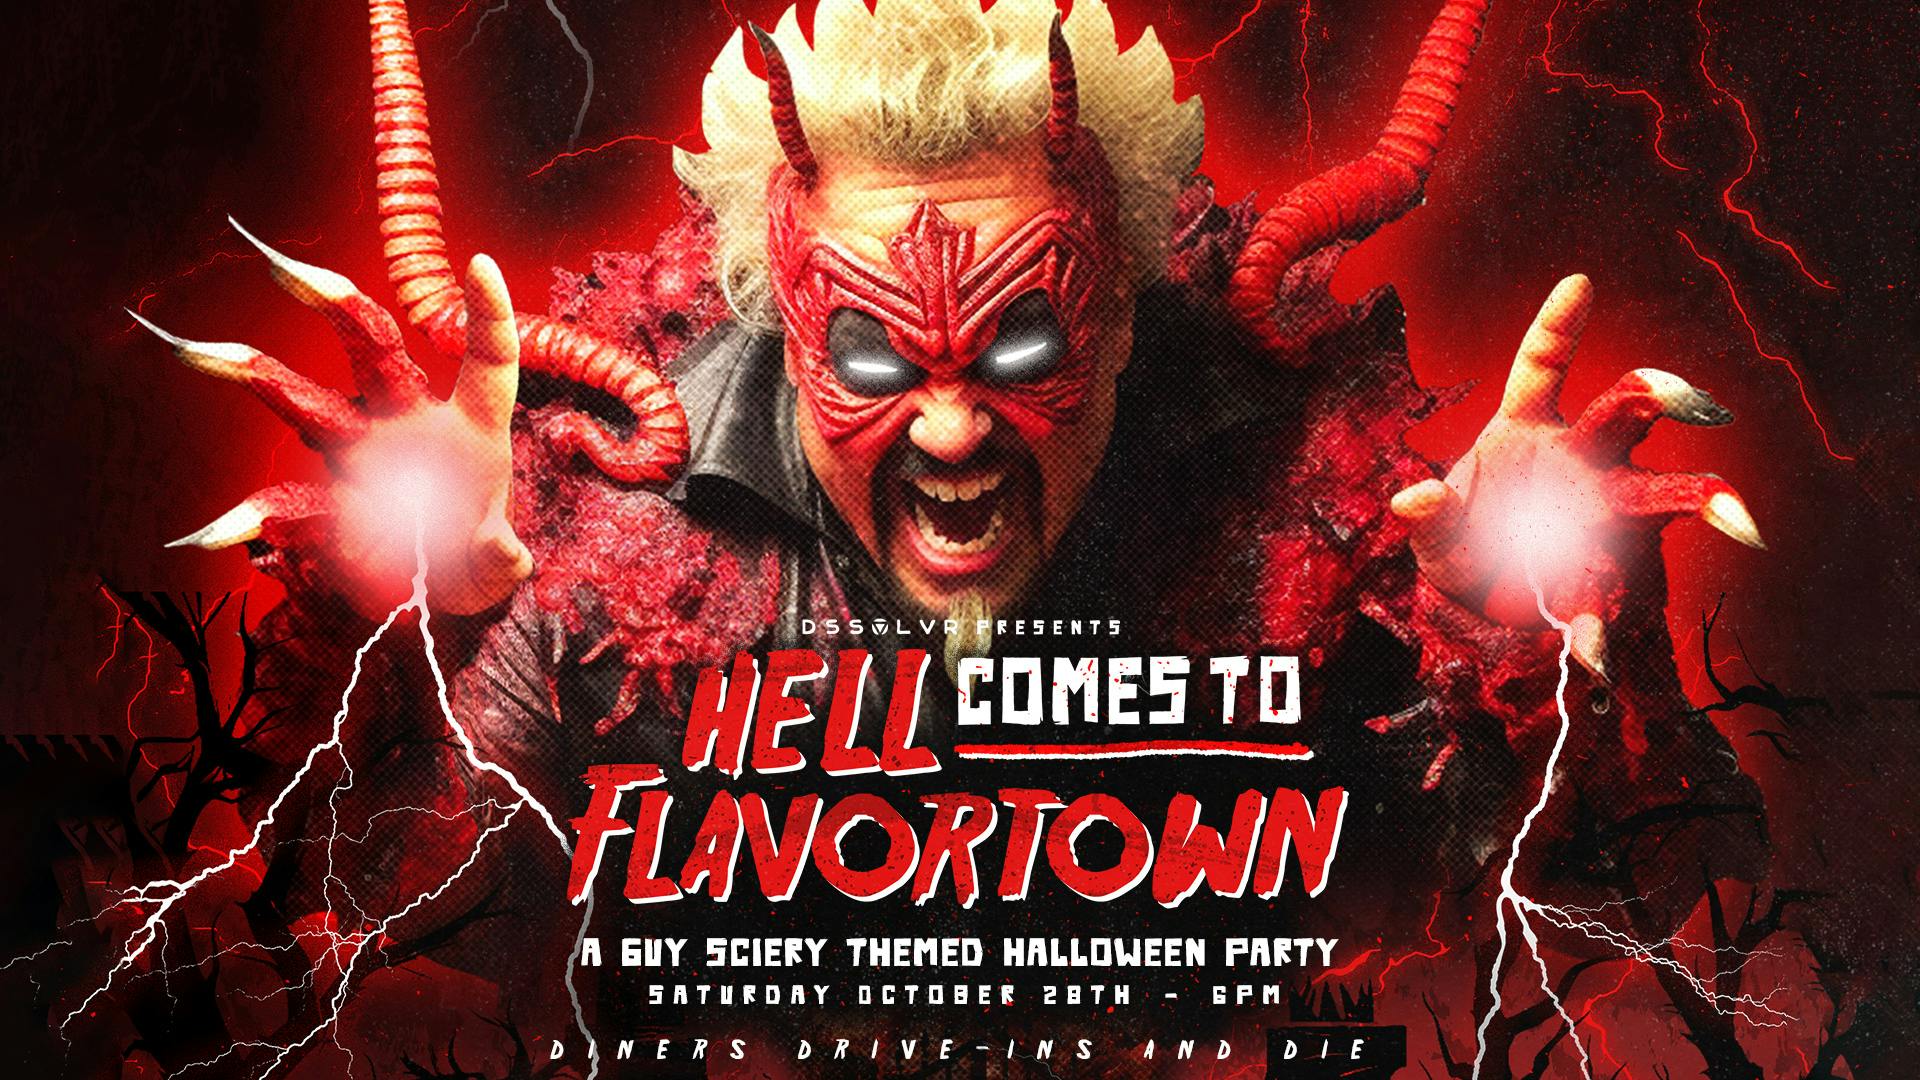 Hell-comes-to-flavortown-banner